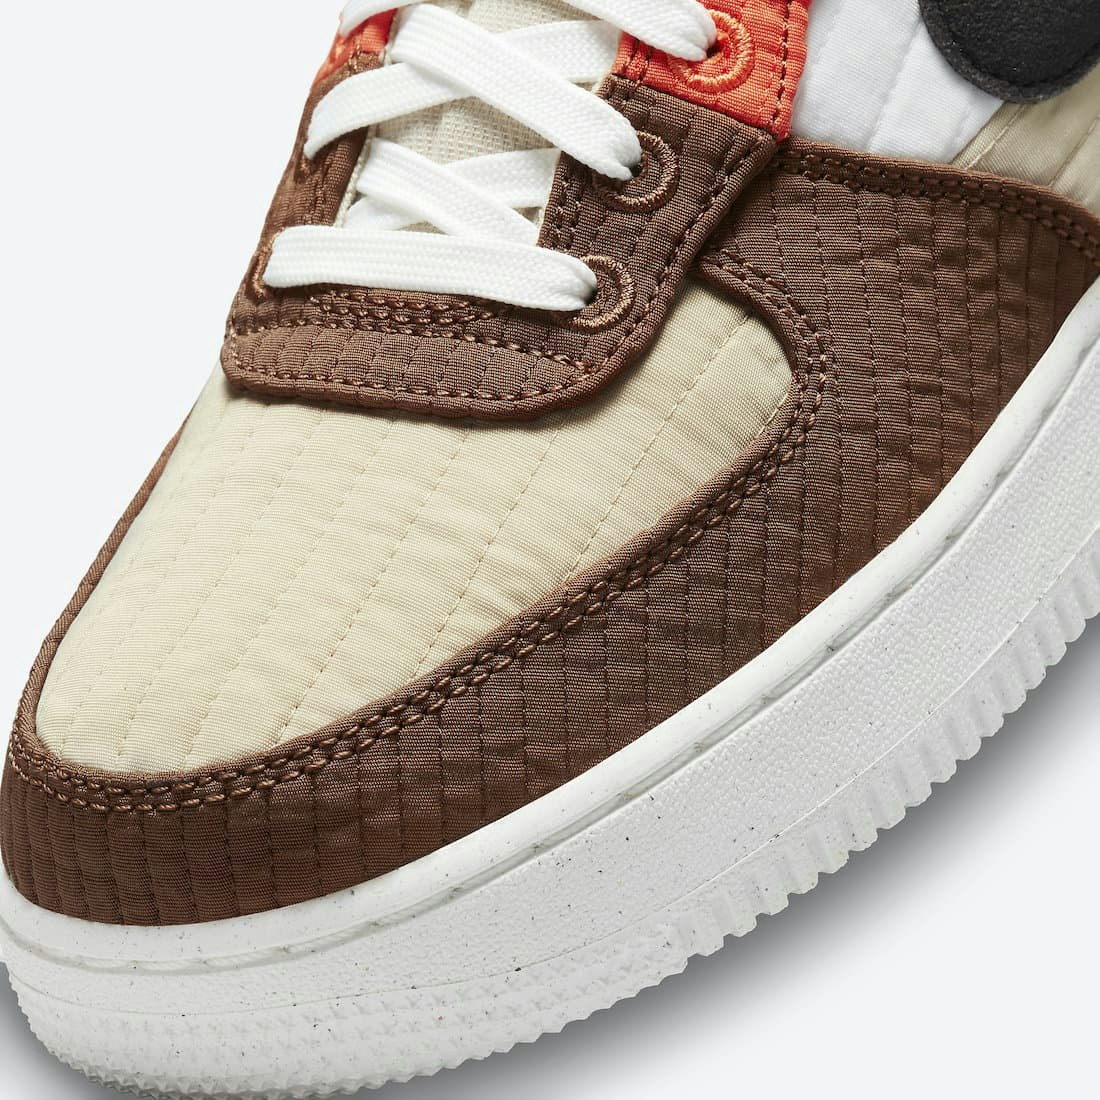 Nike Air Force 1 Low “Toasty” (Pecan)